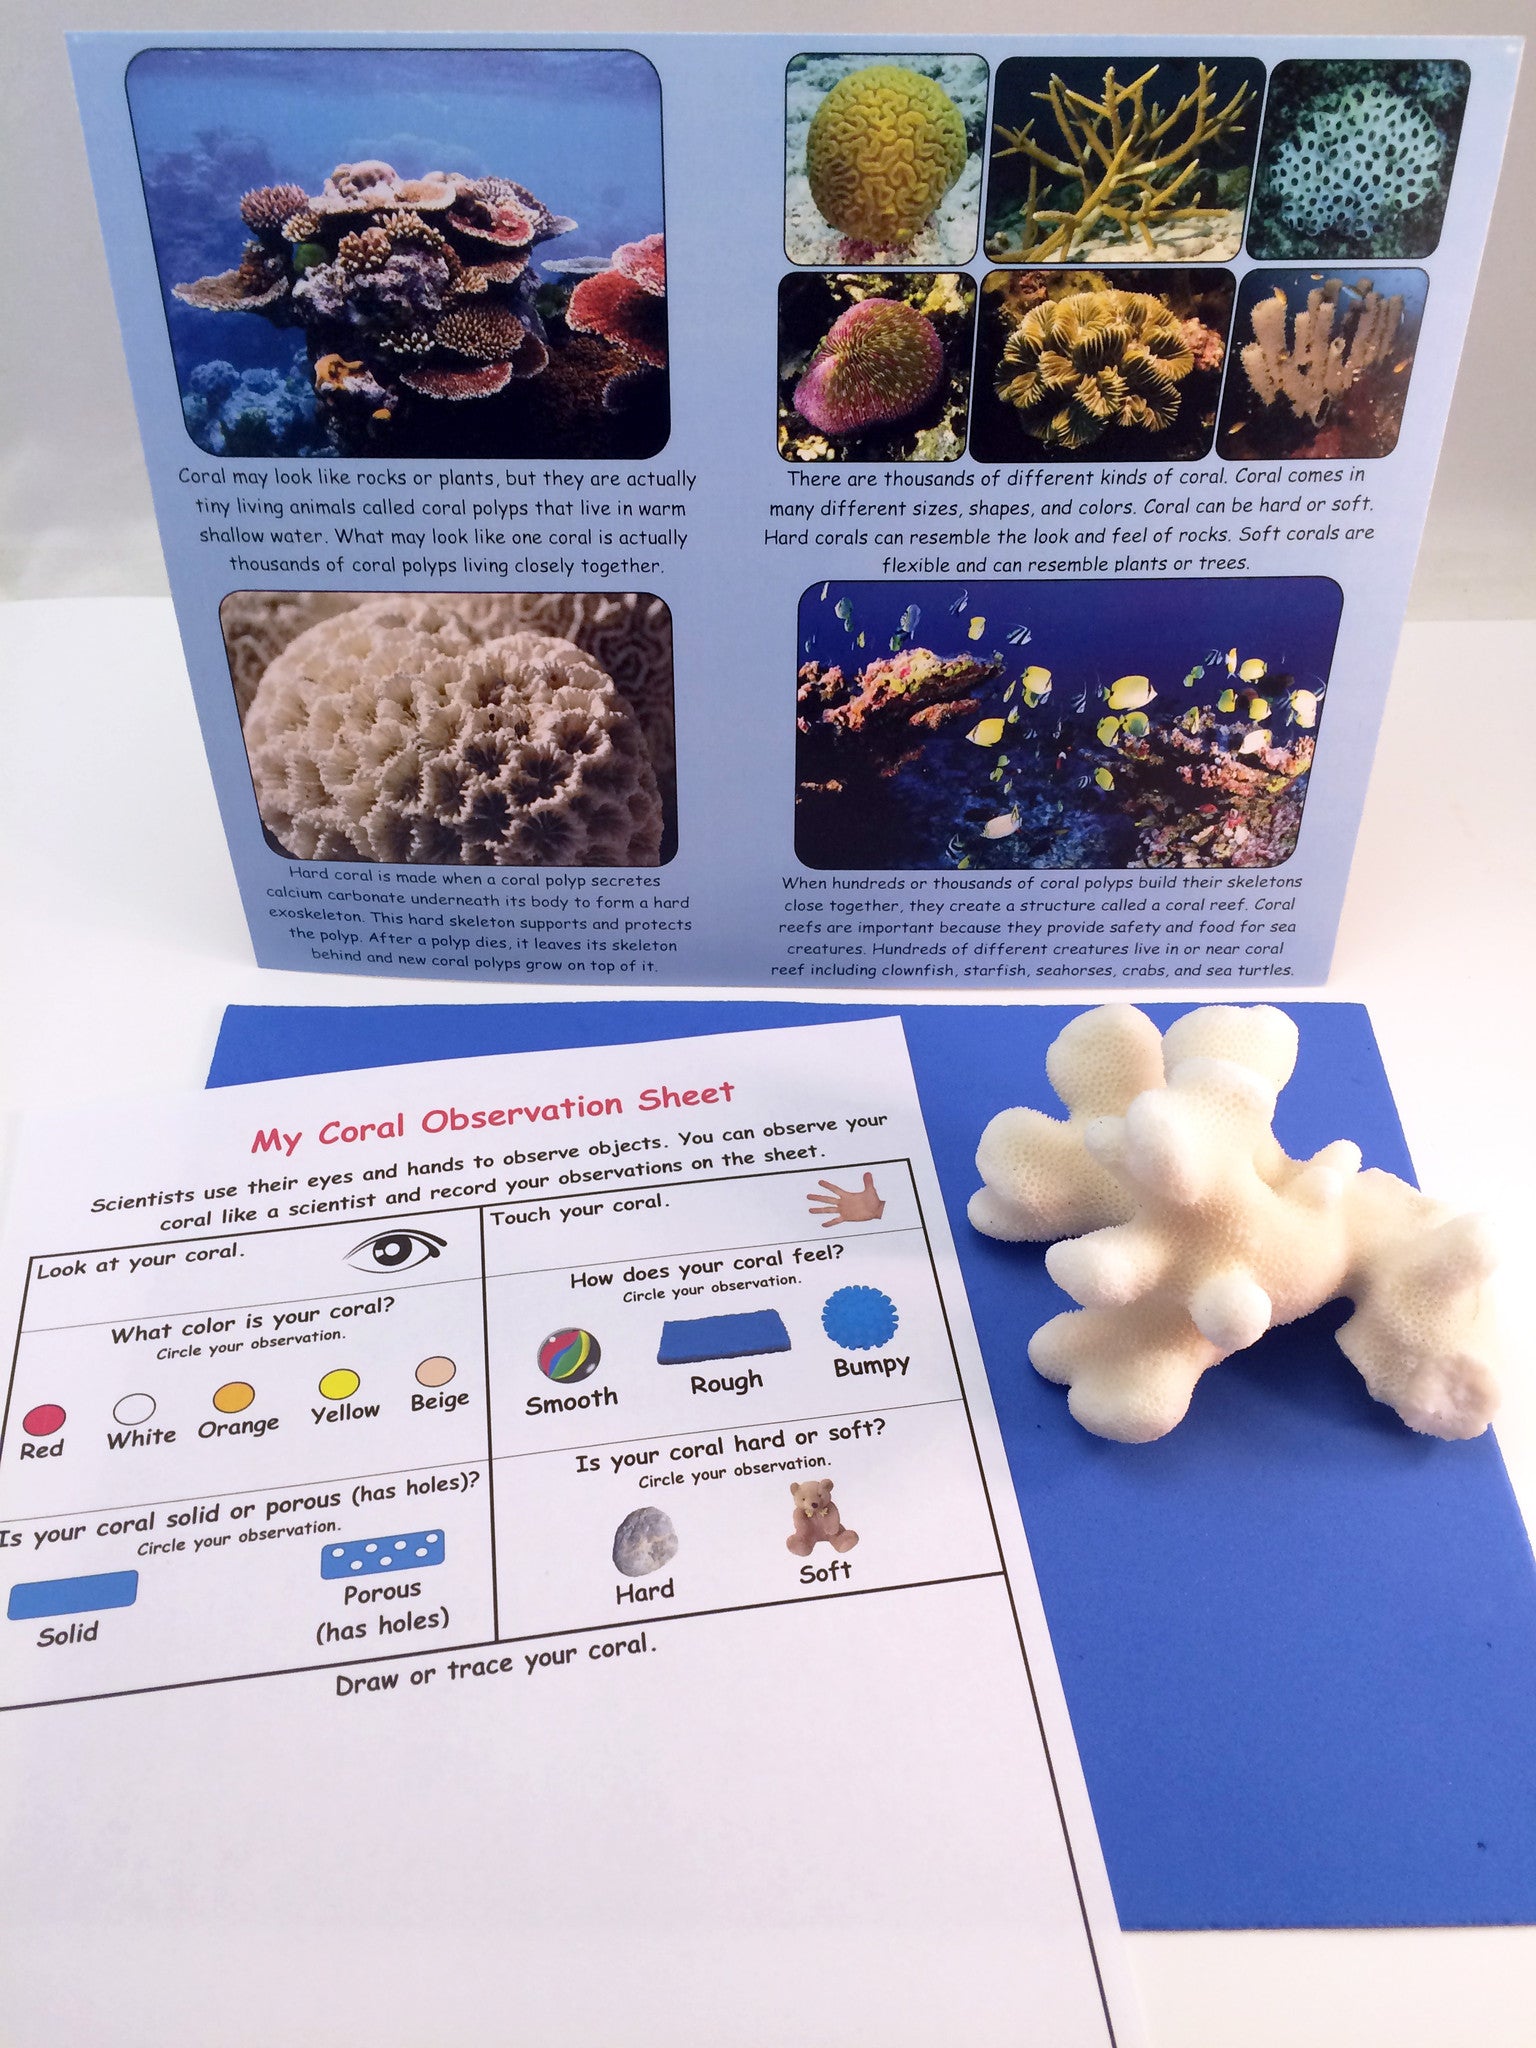 Science activity inspired by the book Over in an Ocean in a Coral Reef. Exploring coral and recording observations.